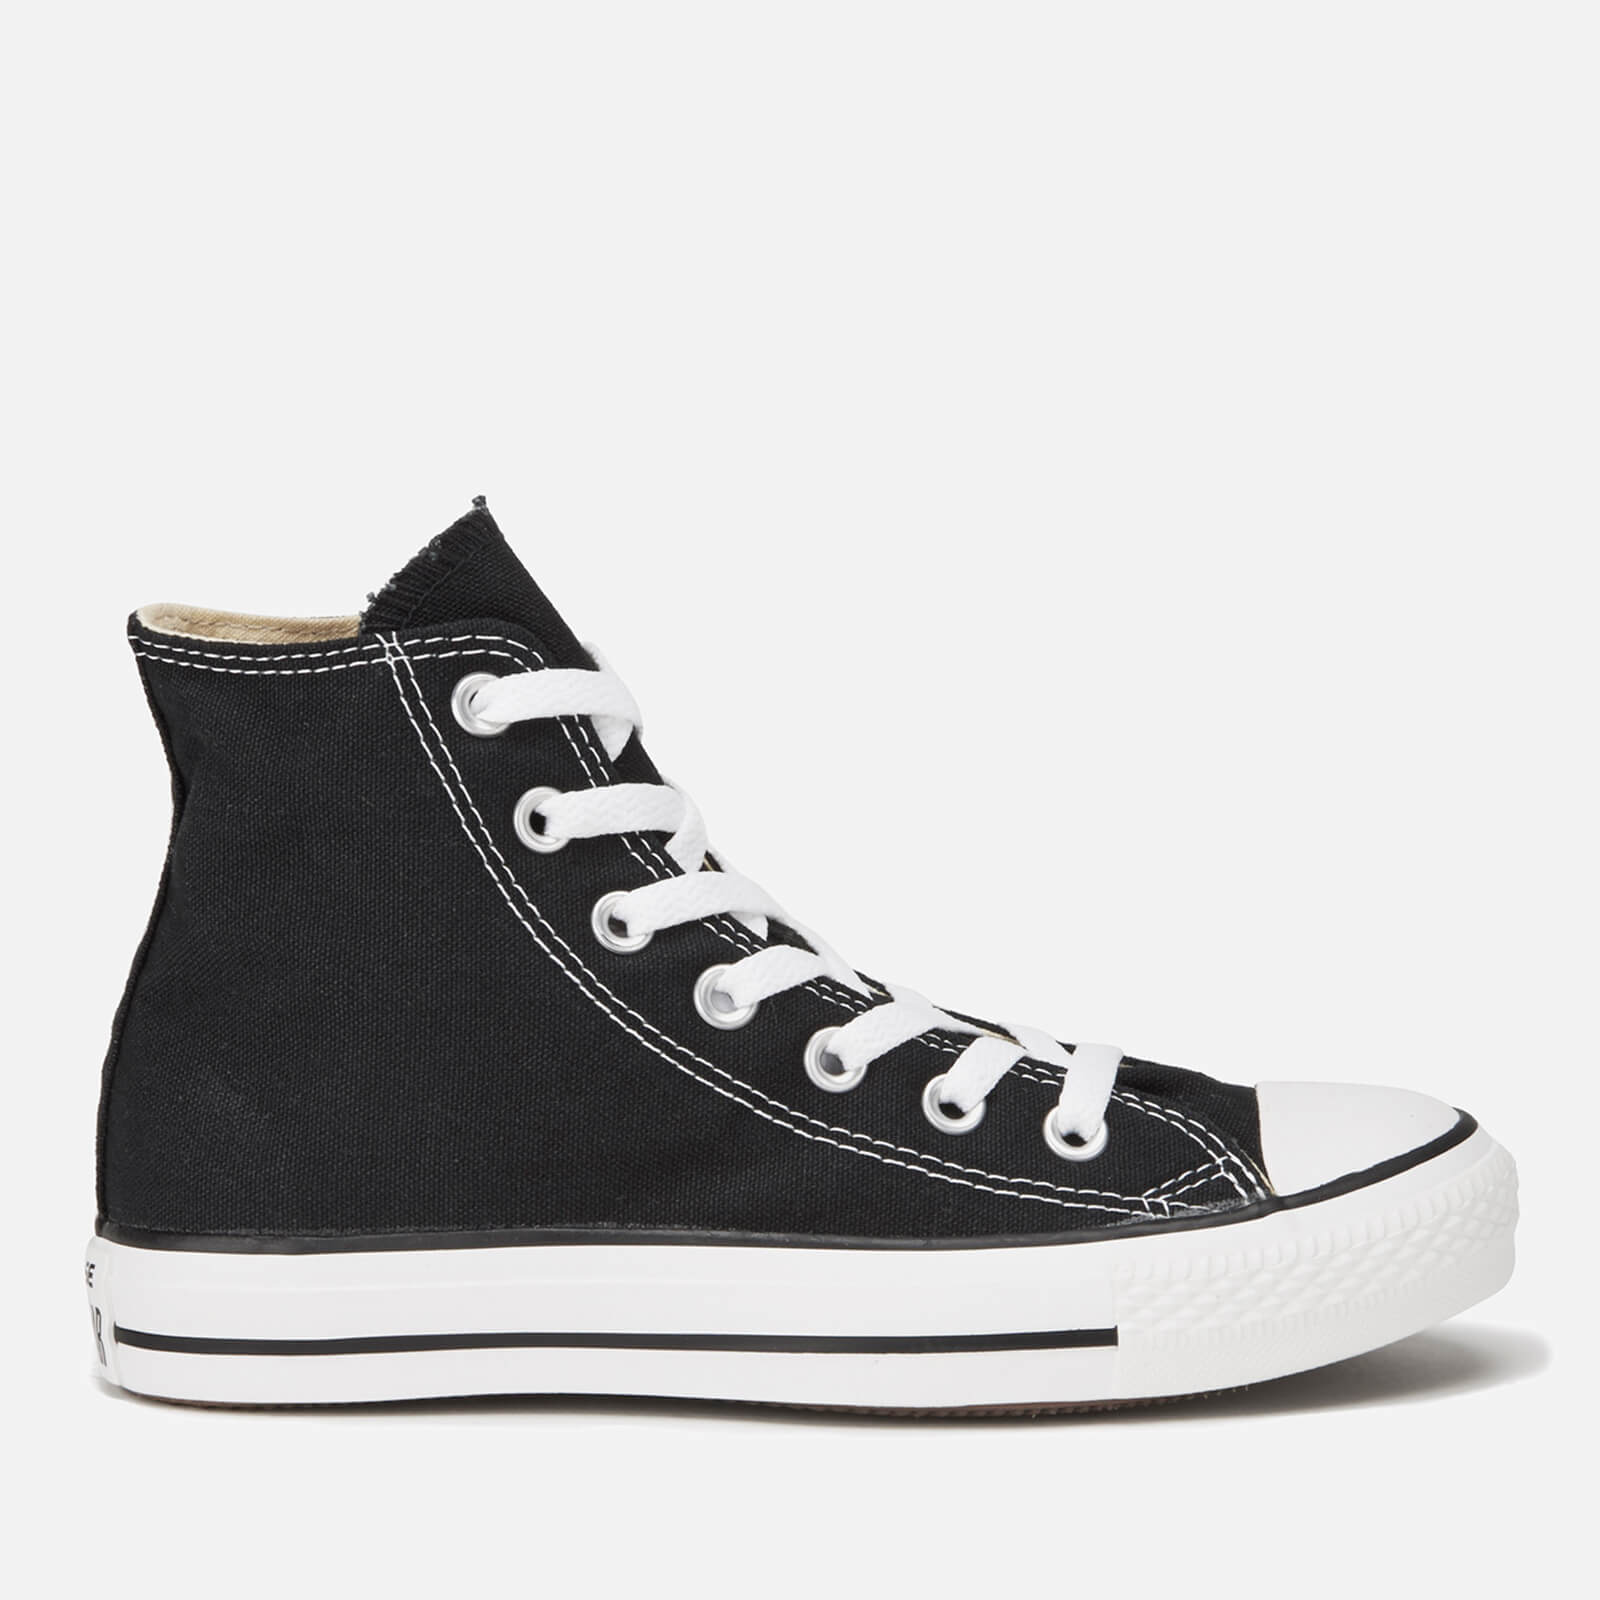 converse uk delivery